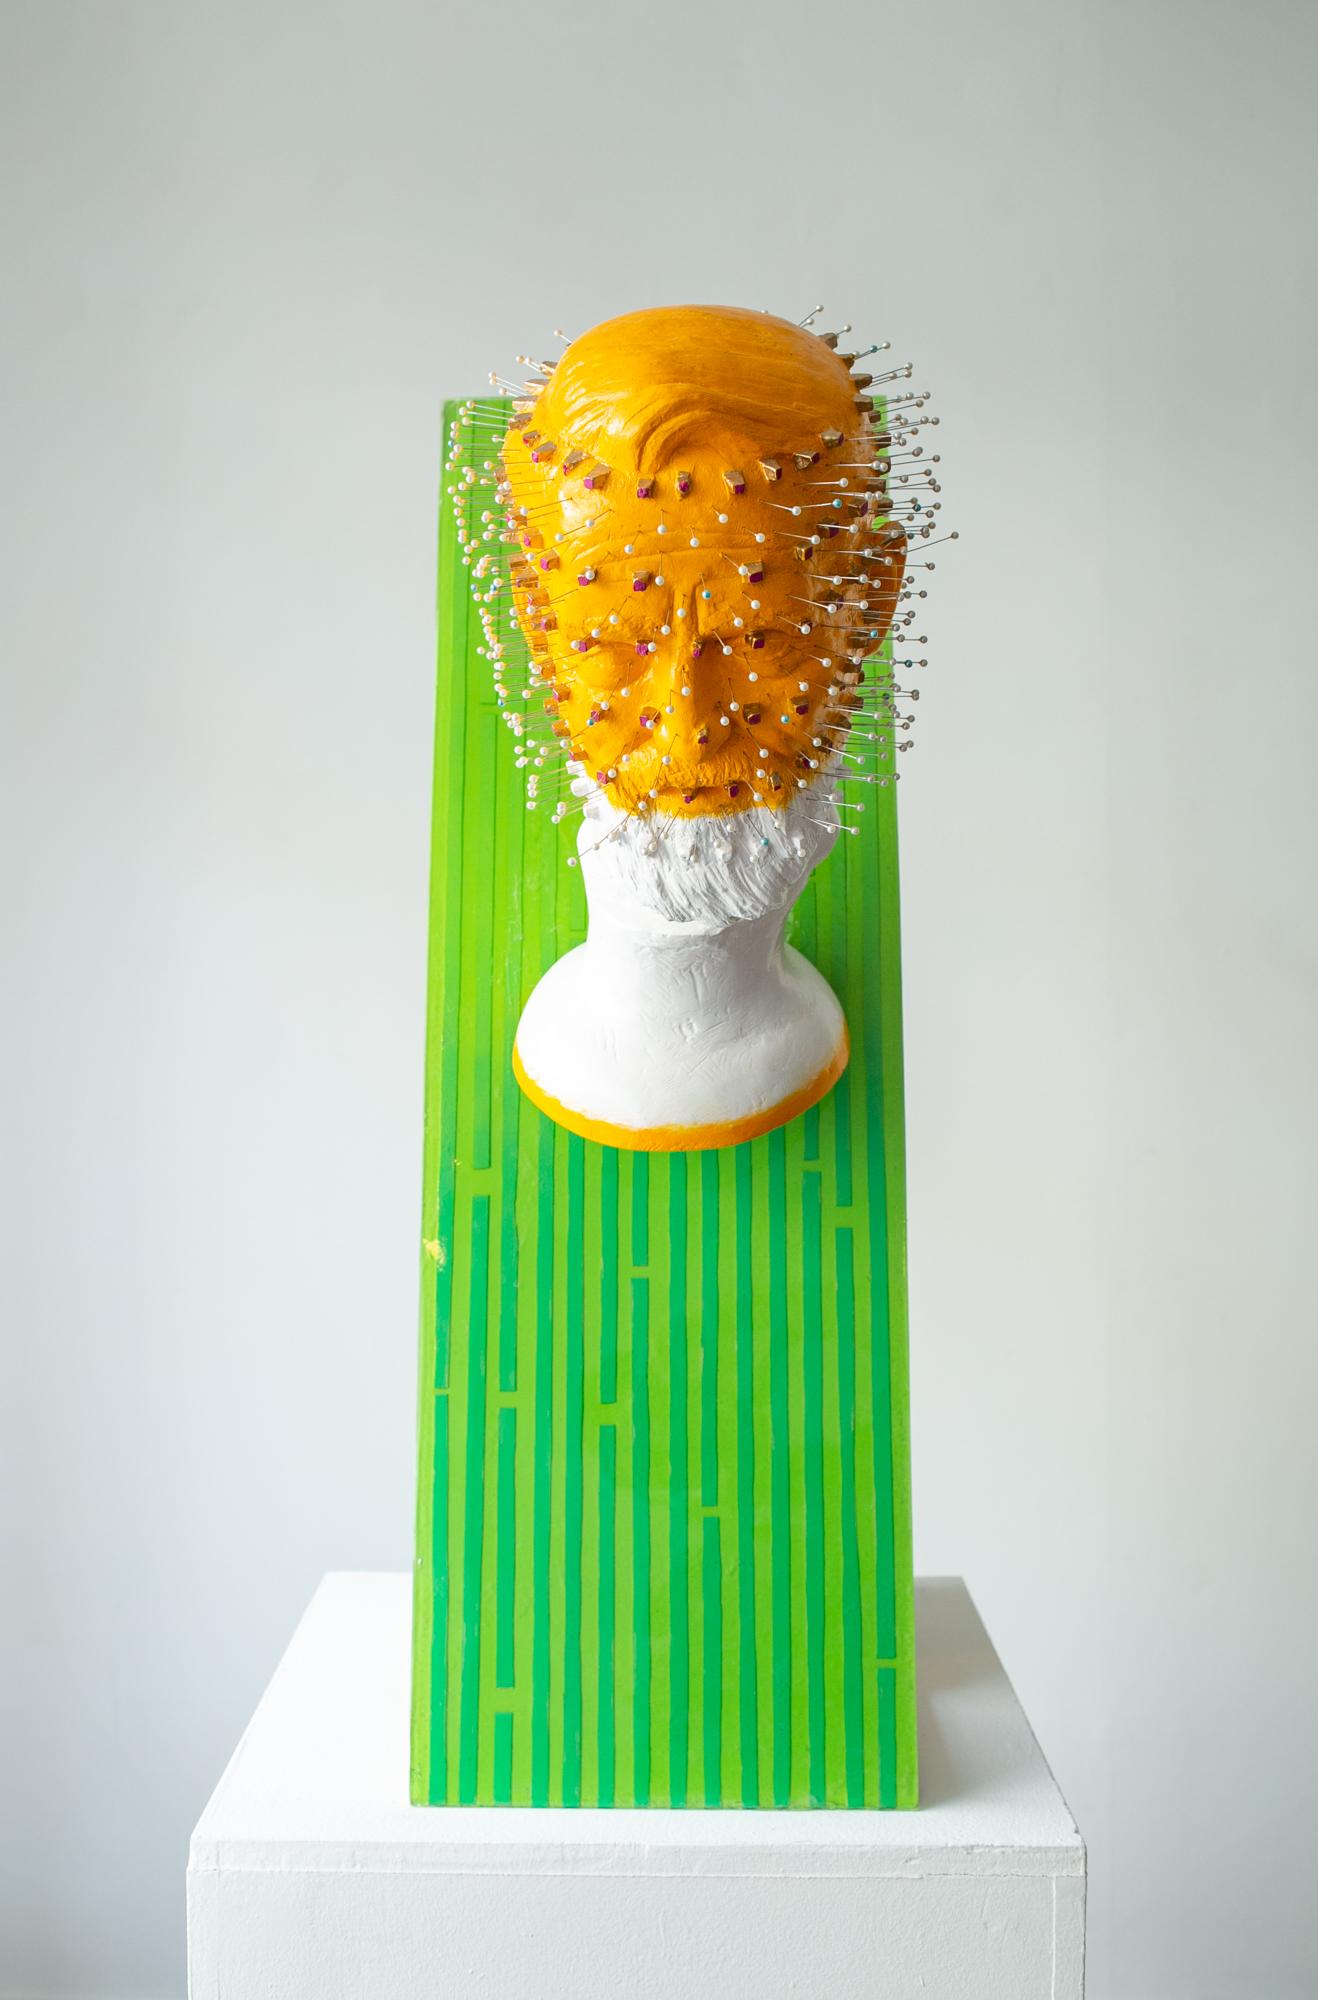 "Deepfake National Monument", Orange, Green, and White Free-Standing Sculpture